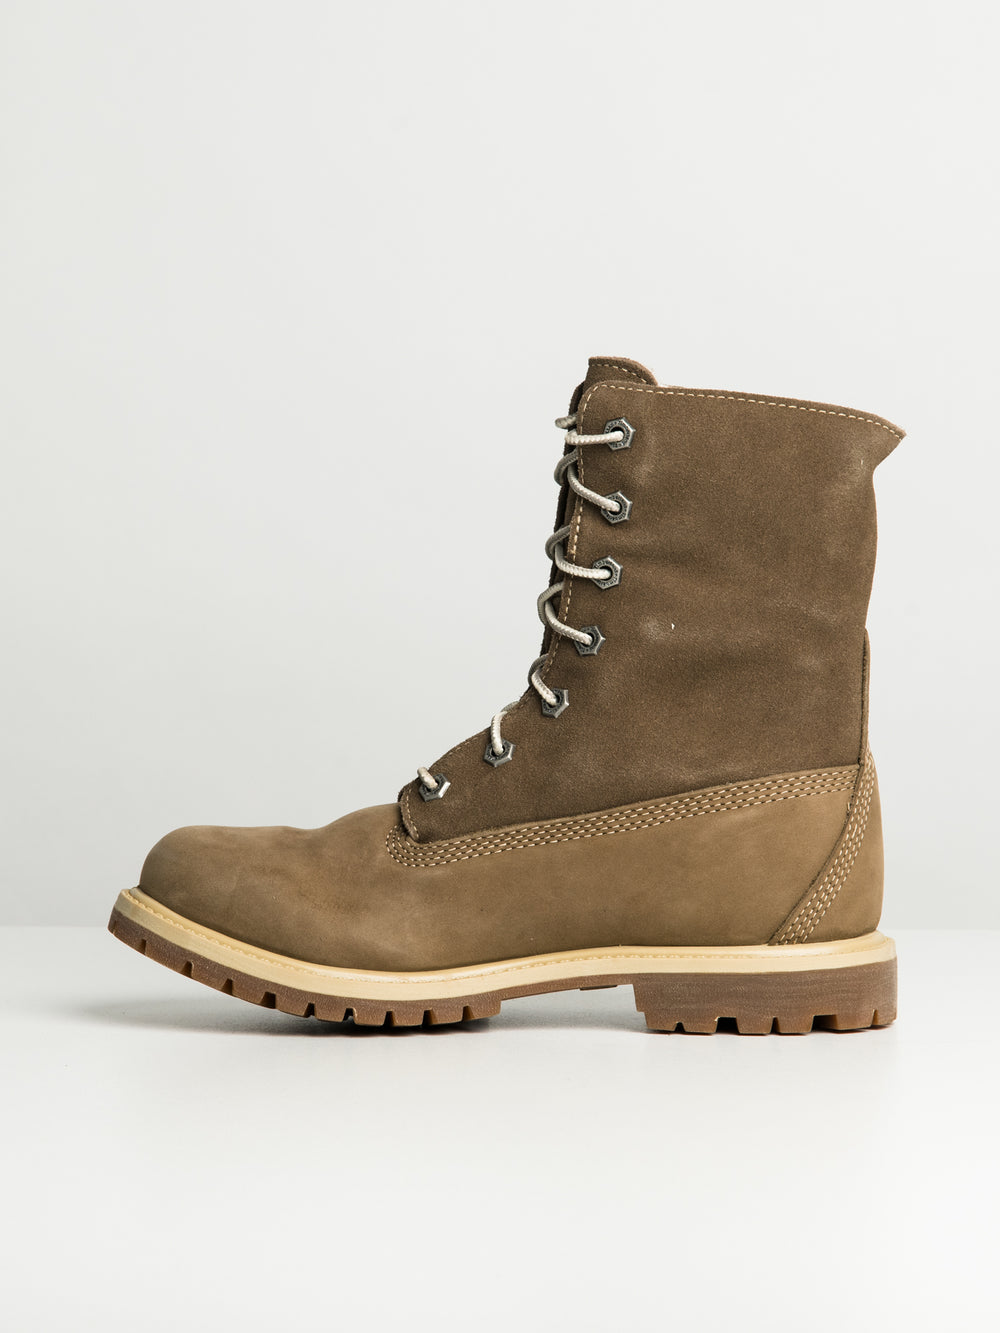 WOMENS TIMBERLAND AUTHENTIC TEDDY FOLD WATERPROOF BOOT